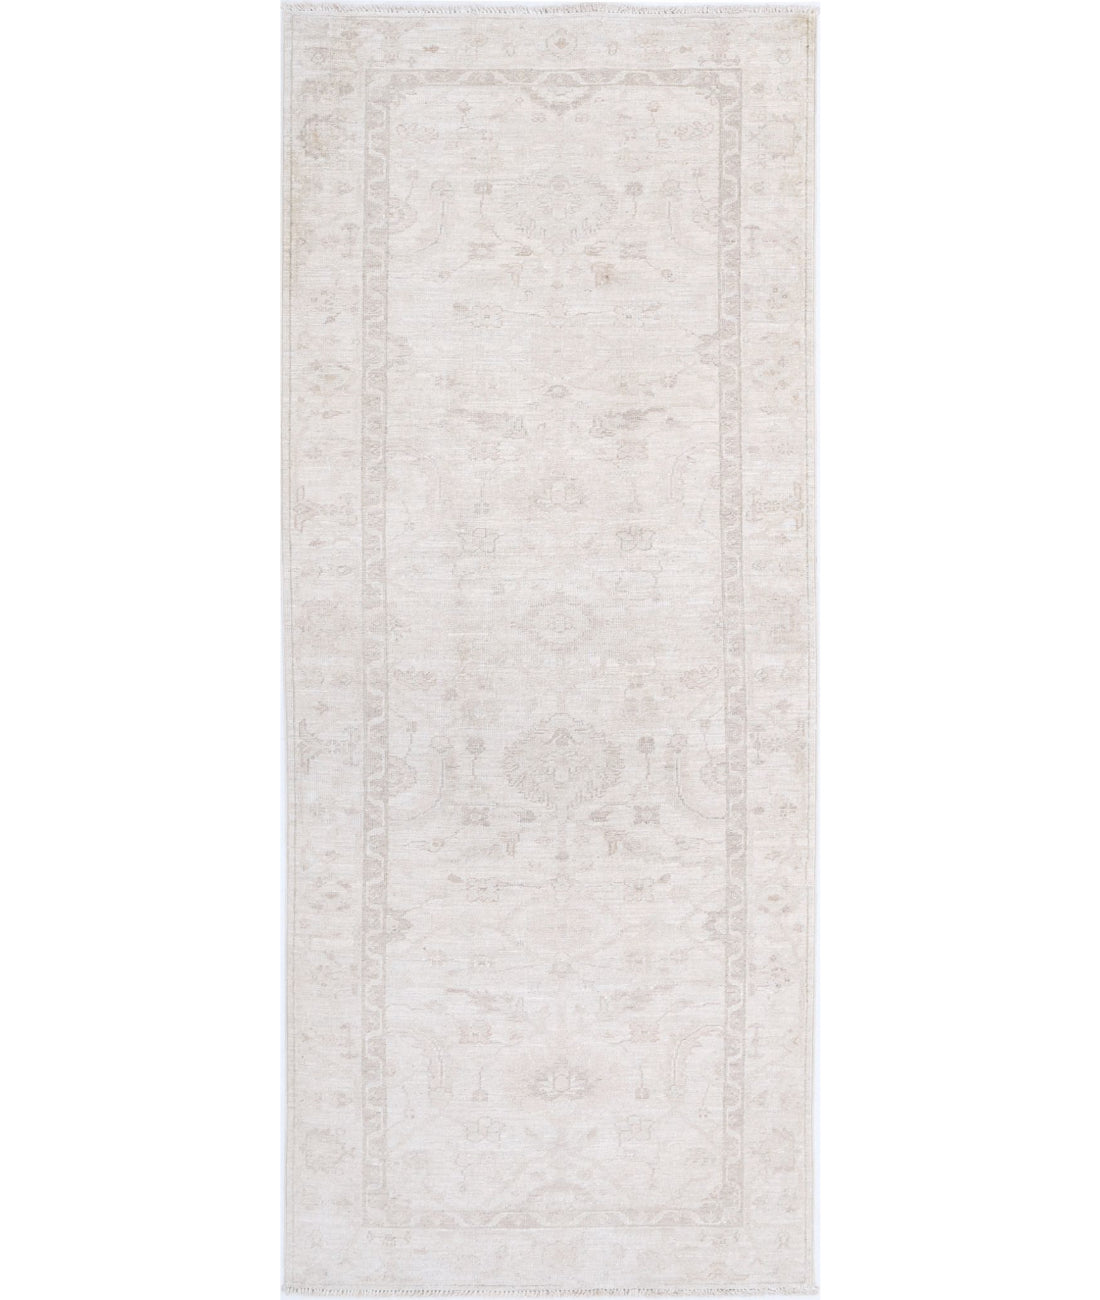 Hand Knotted Serenity Wool Rug - 2'7'' x 6'9'' 2'7'' x 6'9'' (78 X 203) / Ivory / Taupe